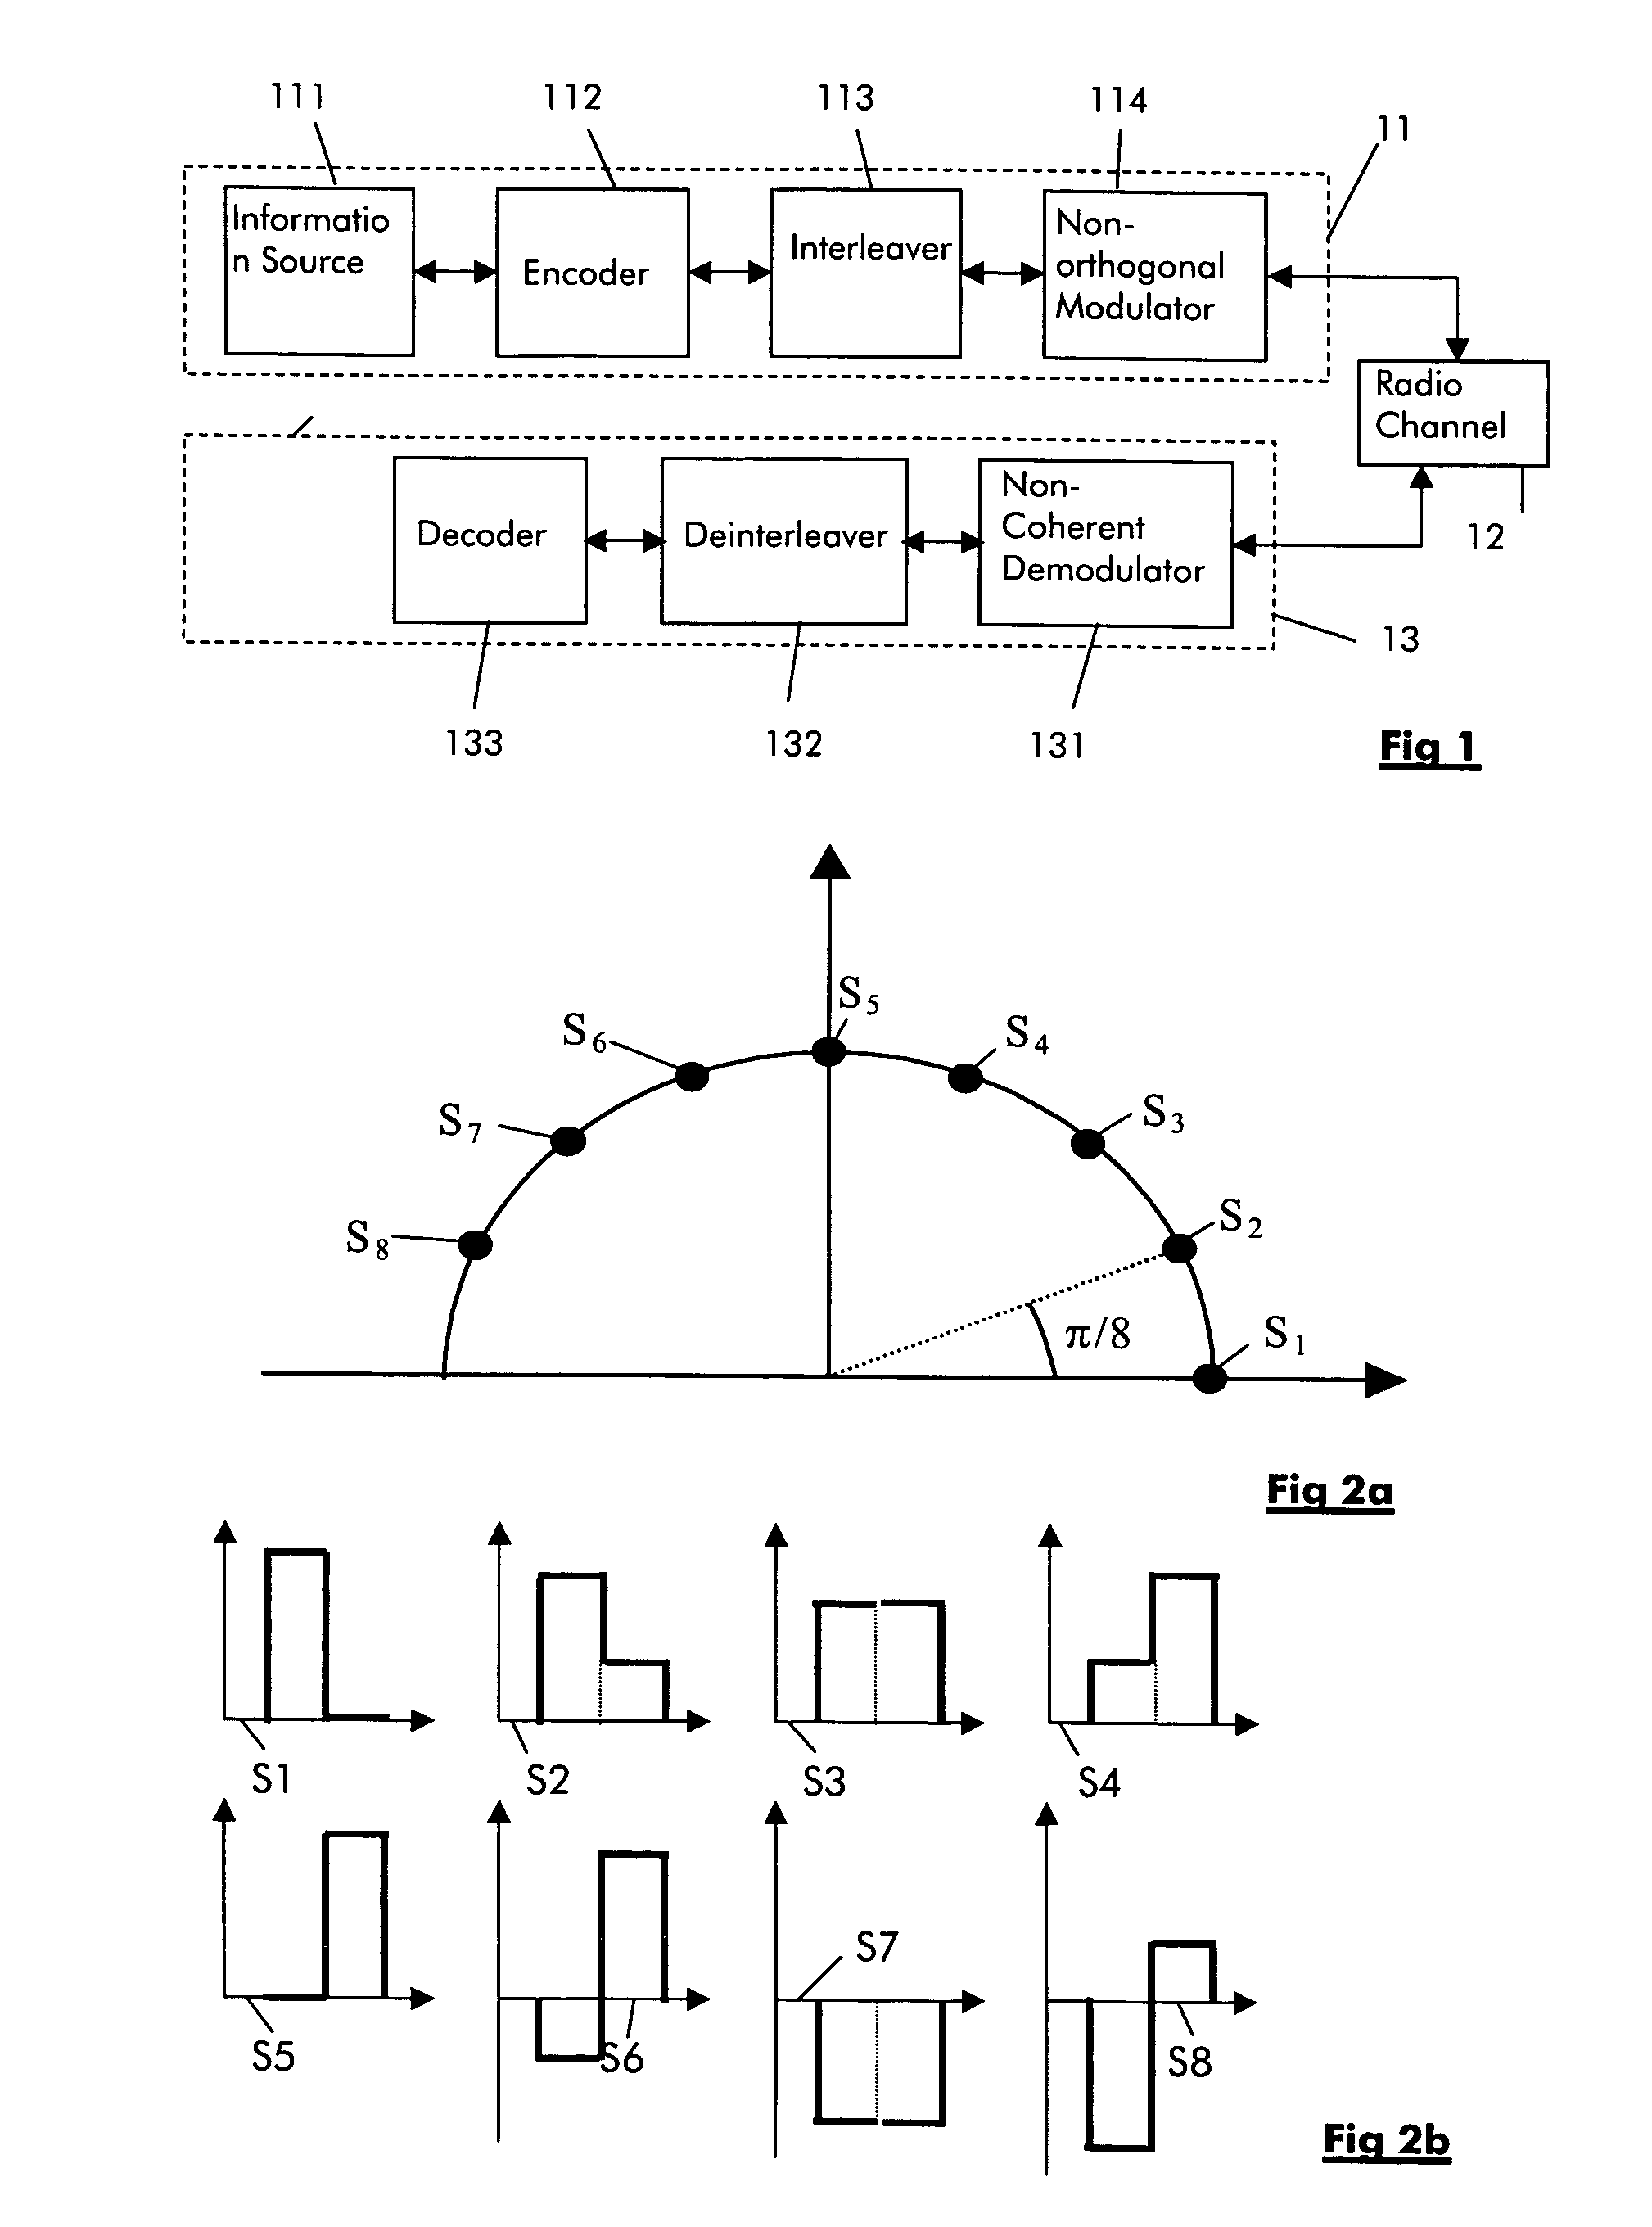 Correlated spreading sequences for high rate non-coherent communication systems